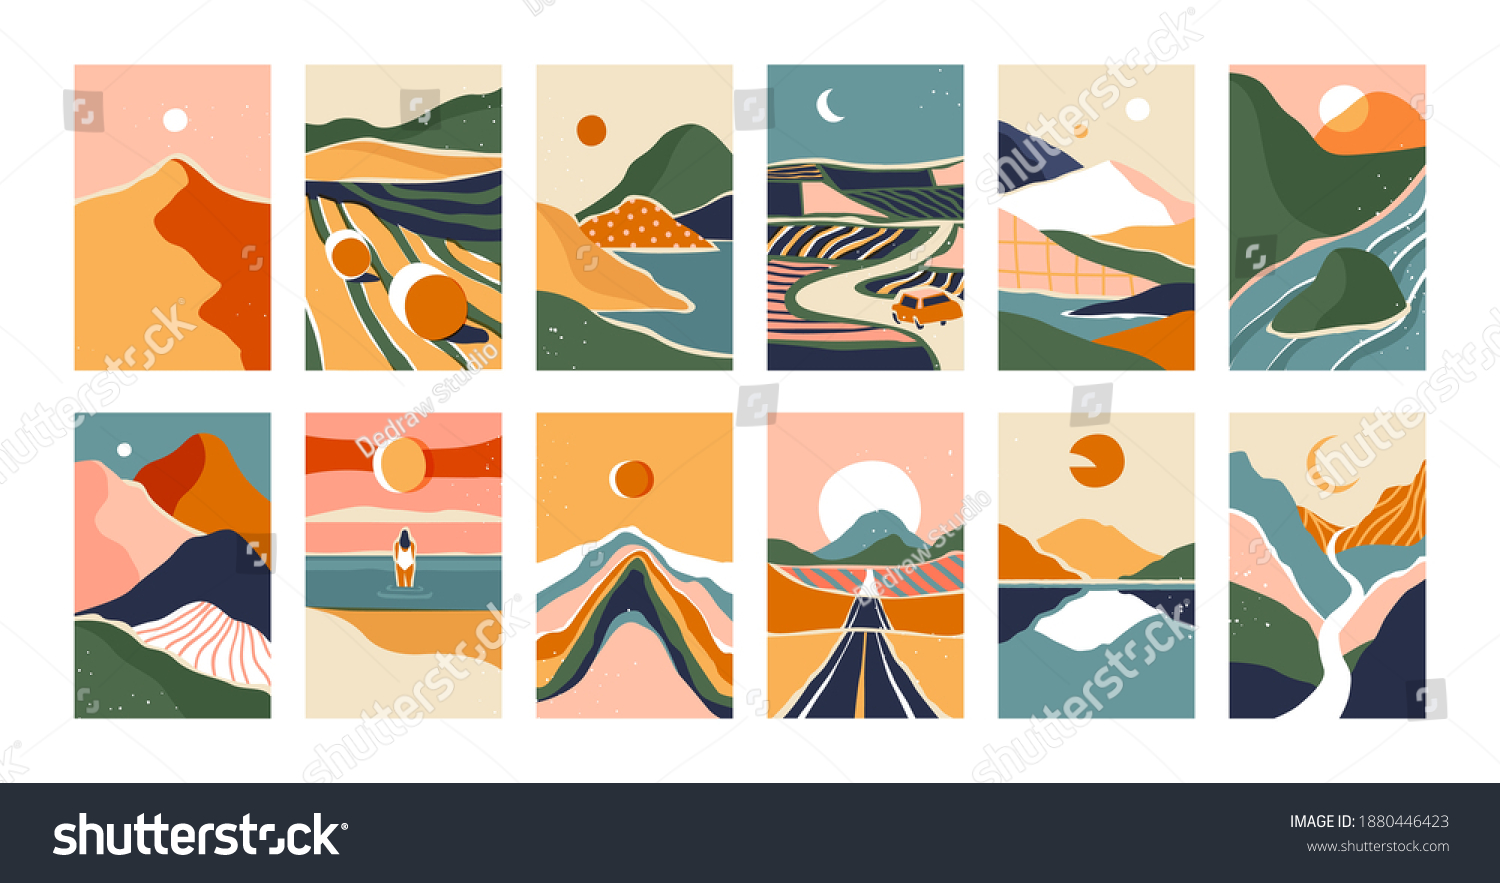 SVG of Big set of abstract mountain landscape banner collection. Trendy flat collage art style backgrounds of diverse vintage travel scenery. Nature environment, coast biome, multicolor hills, desert dunes. svg